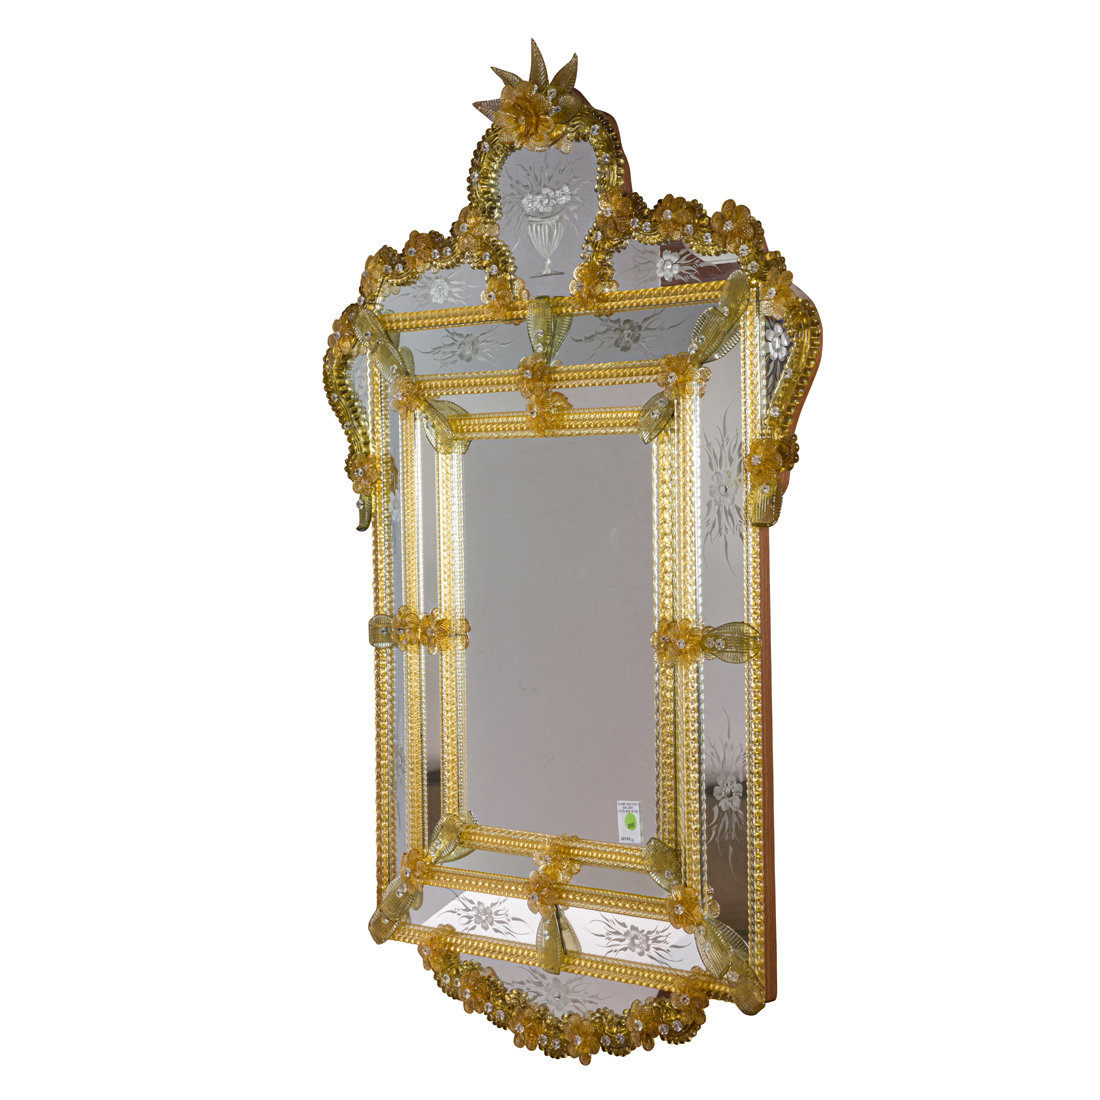 A VENETIAN MIRROR IN THE MANNER